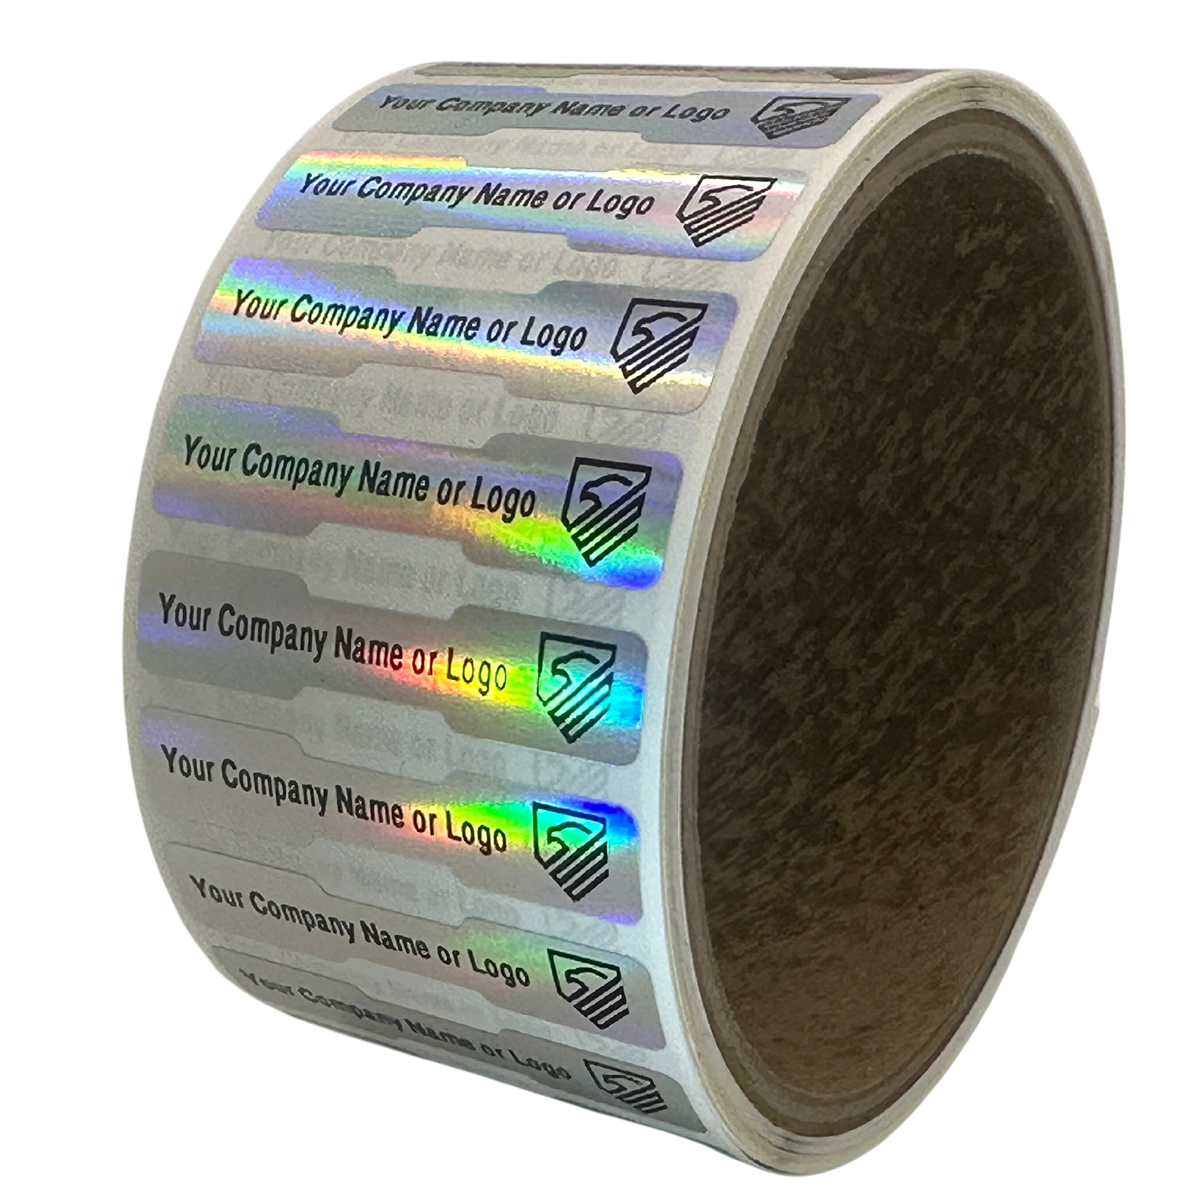 2,000 TamperColor Holographic Rainbow Color/ Finish Custom Printed Security Labels: Tamper Evident, Dogbone Shape Size 1.75" x 0.375 (44mm x 9mm) >Click on item details to customize.